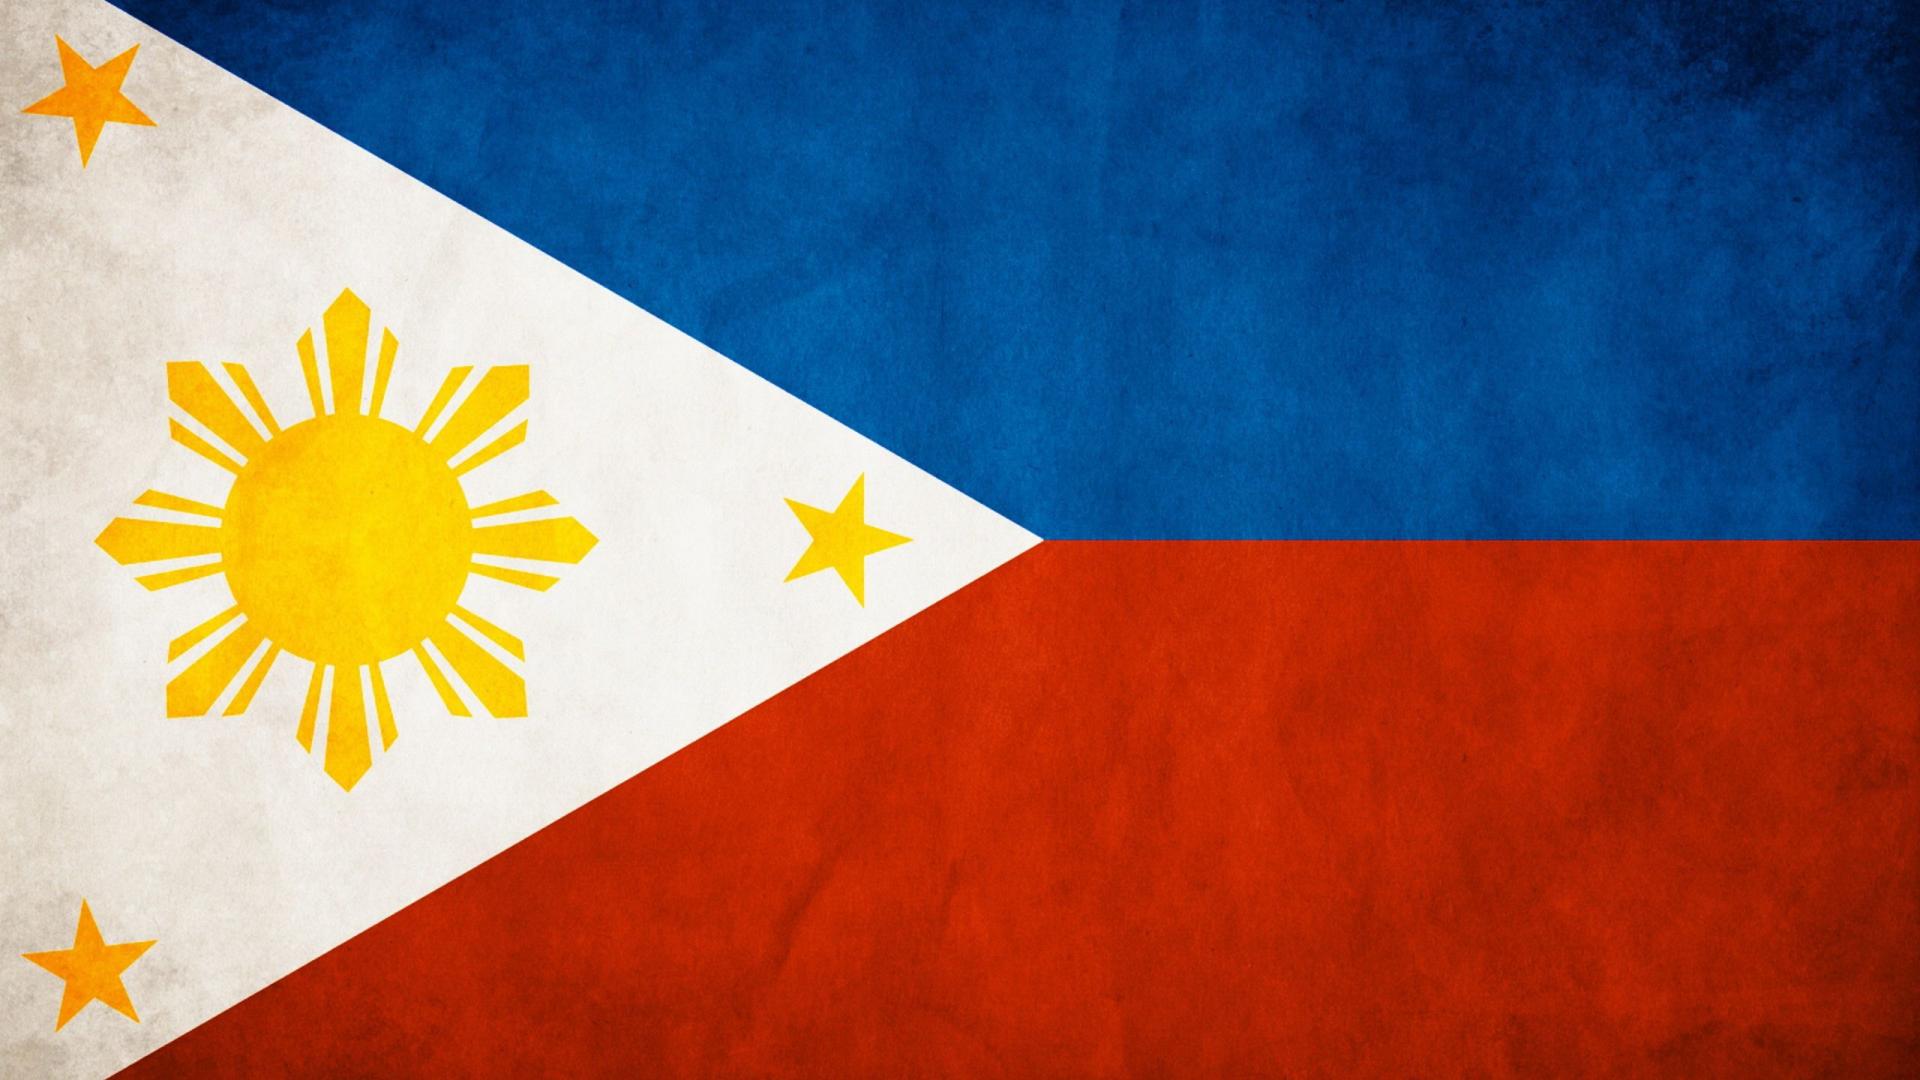 Philippines Flag Wallpaper   MixHD wallpapers 1920x1080